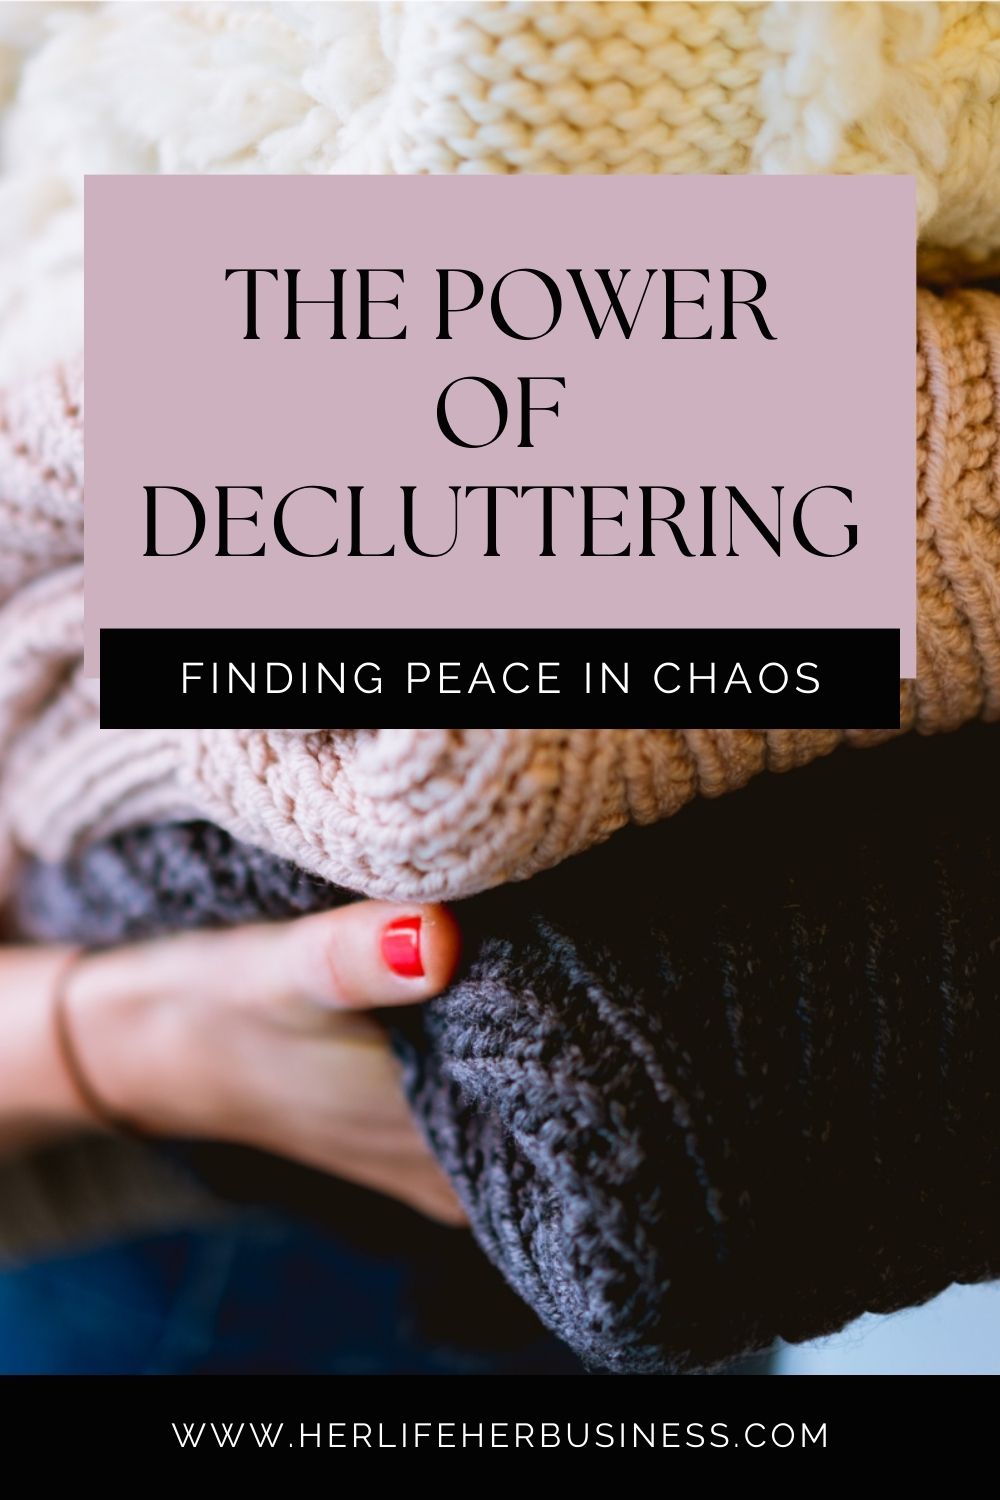 The power of decluttering